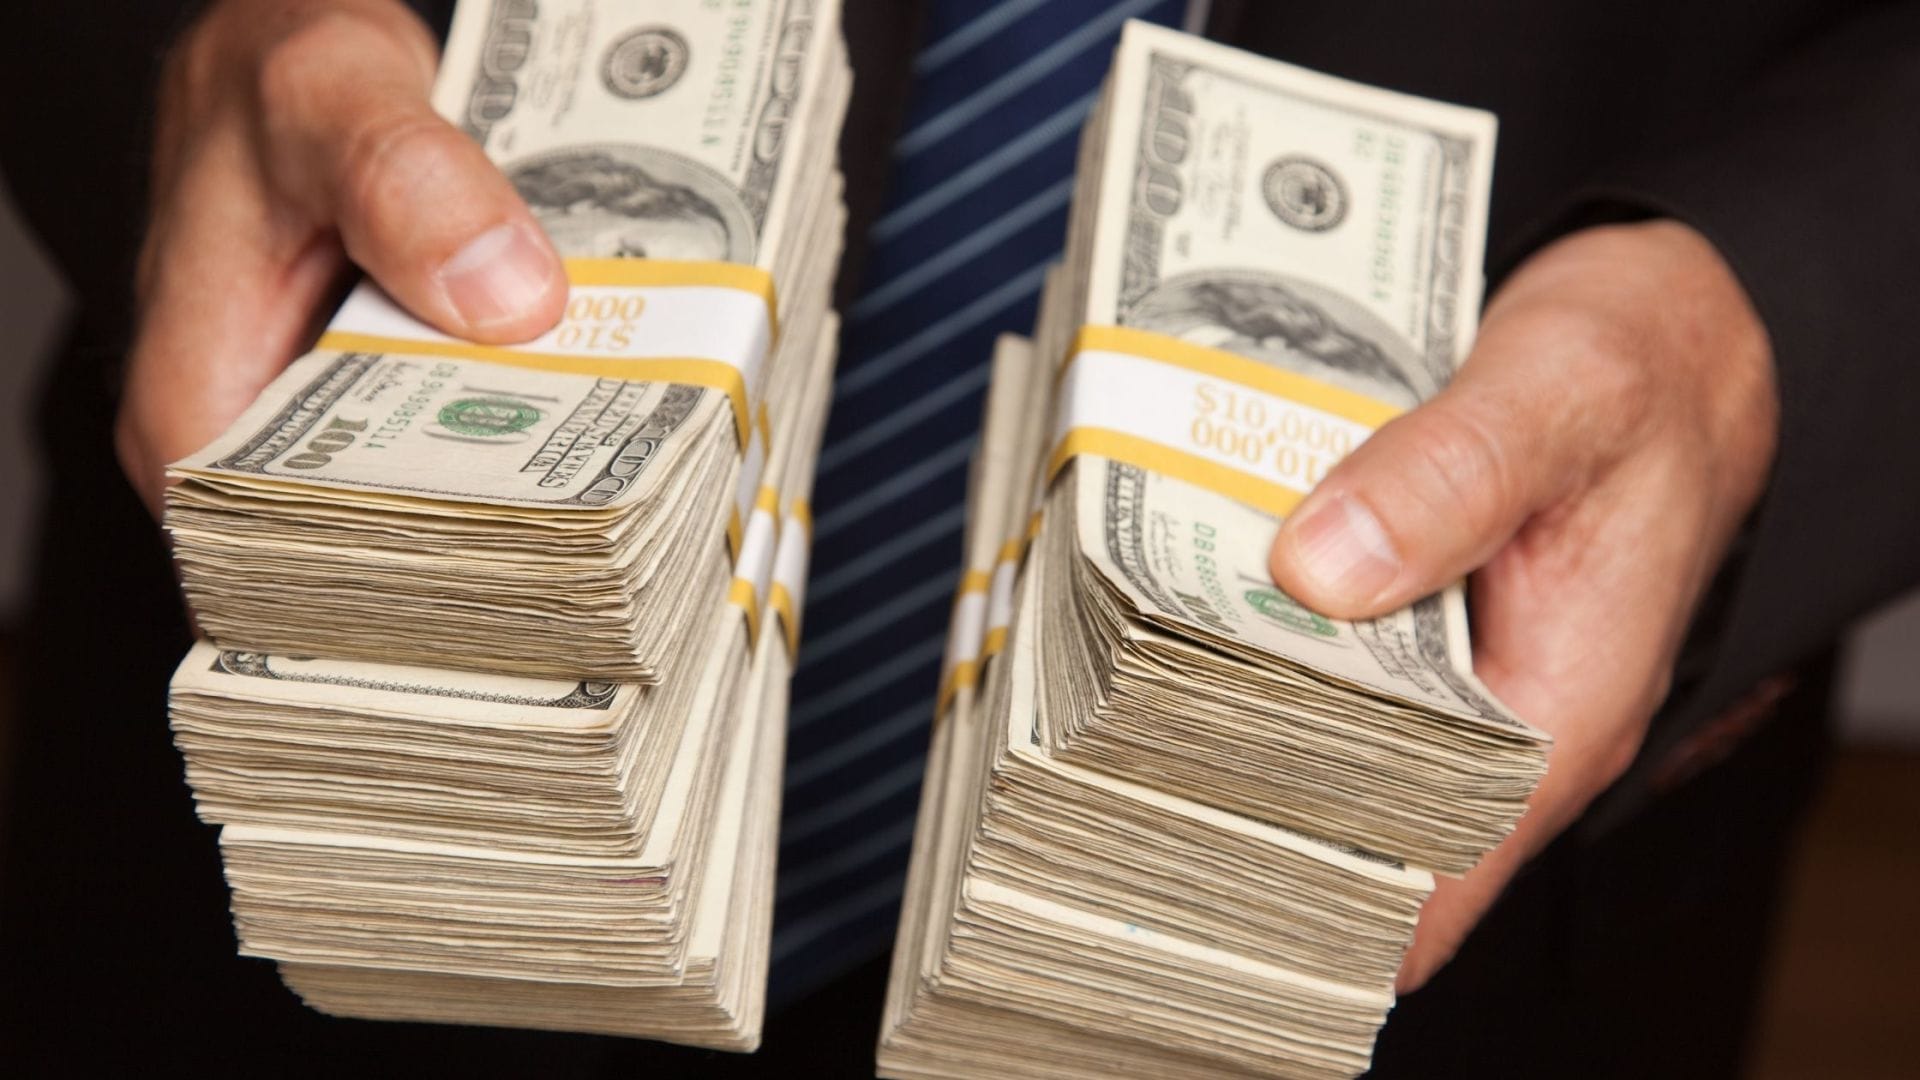 Two hands are holding stacks of U.S. hundred-dollar bills, wrapped with currency bands labeled '10,000.' This image could be used to discuss viatical settlements as a financial resource to cover renal cancer treatment costs. The person holding the money is wearing a dark suit, suggesting a formal financial or business setting.